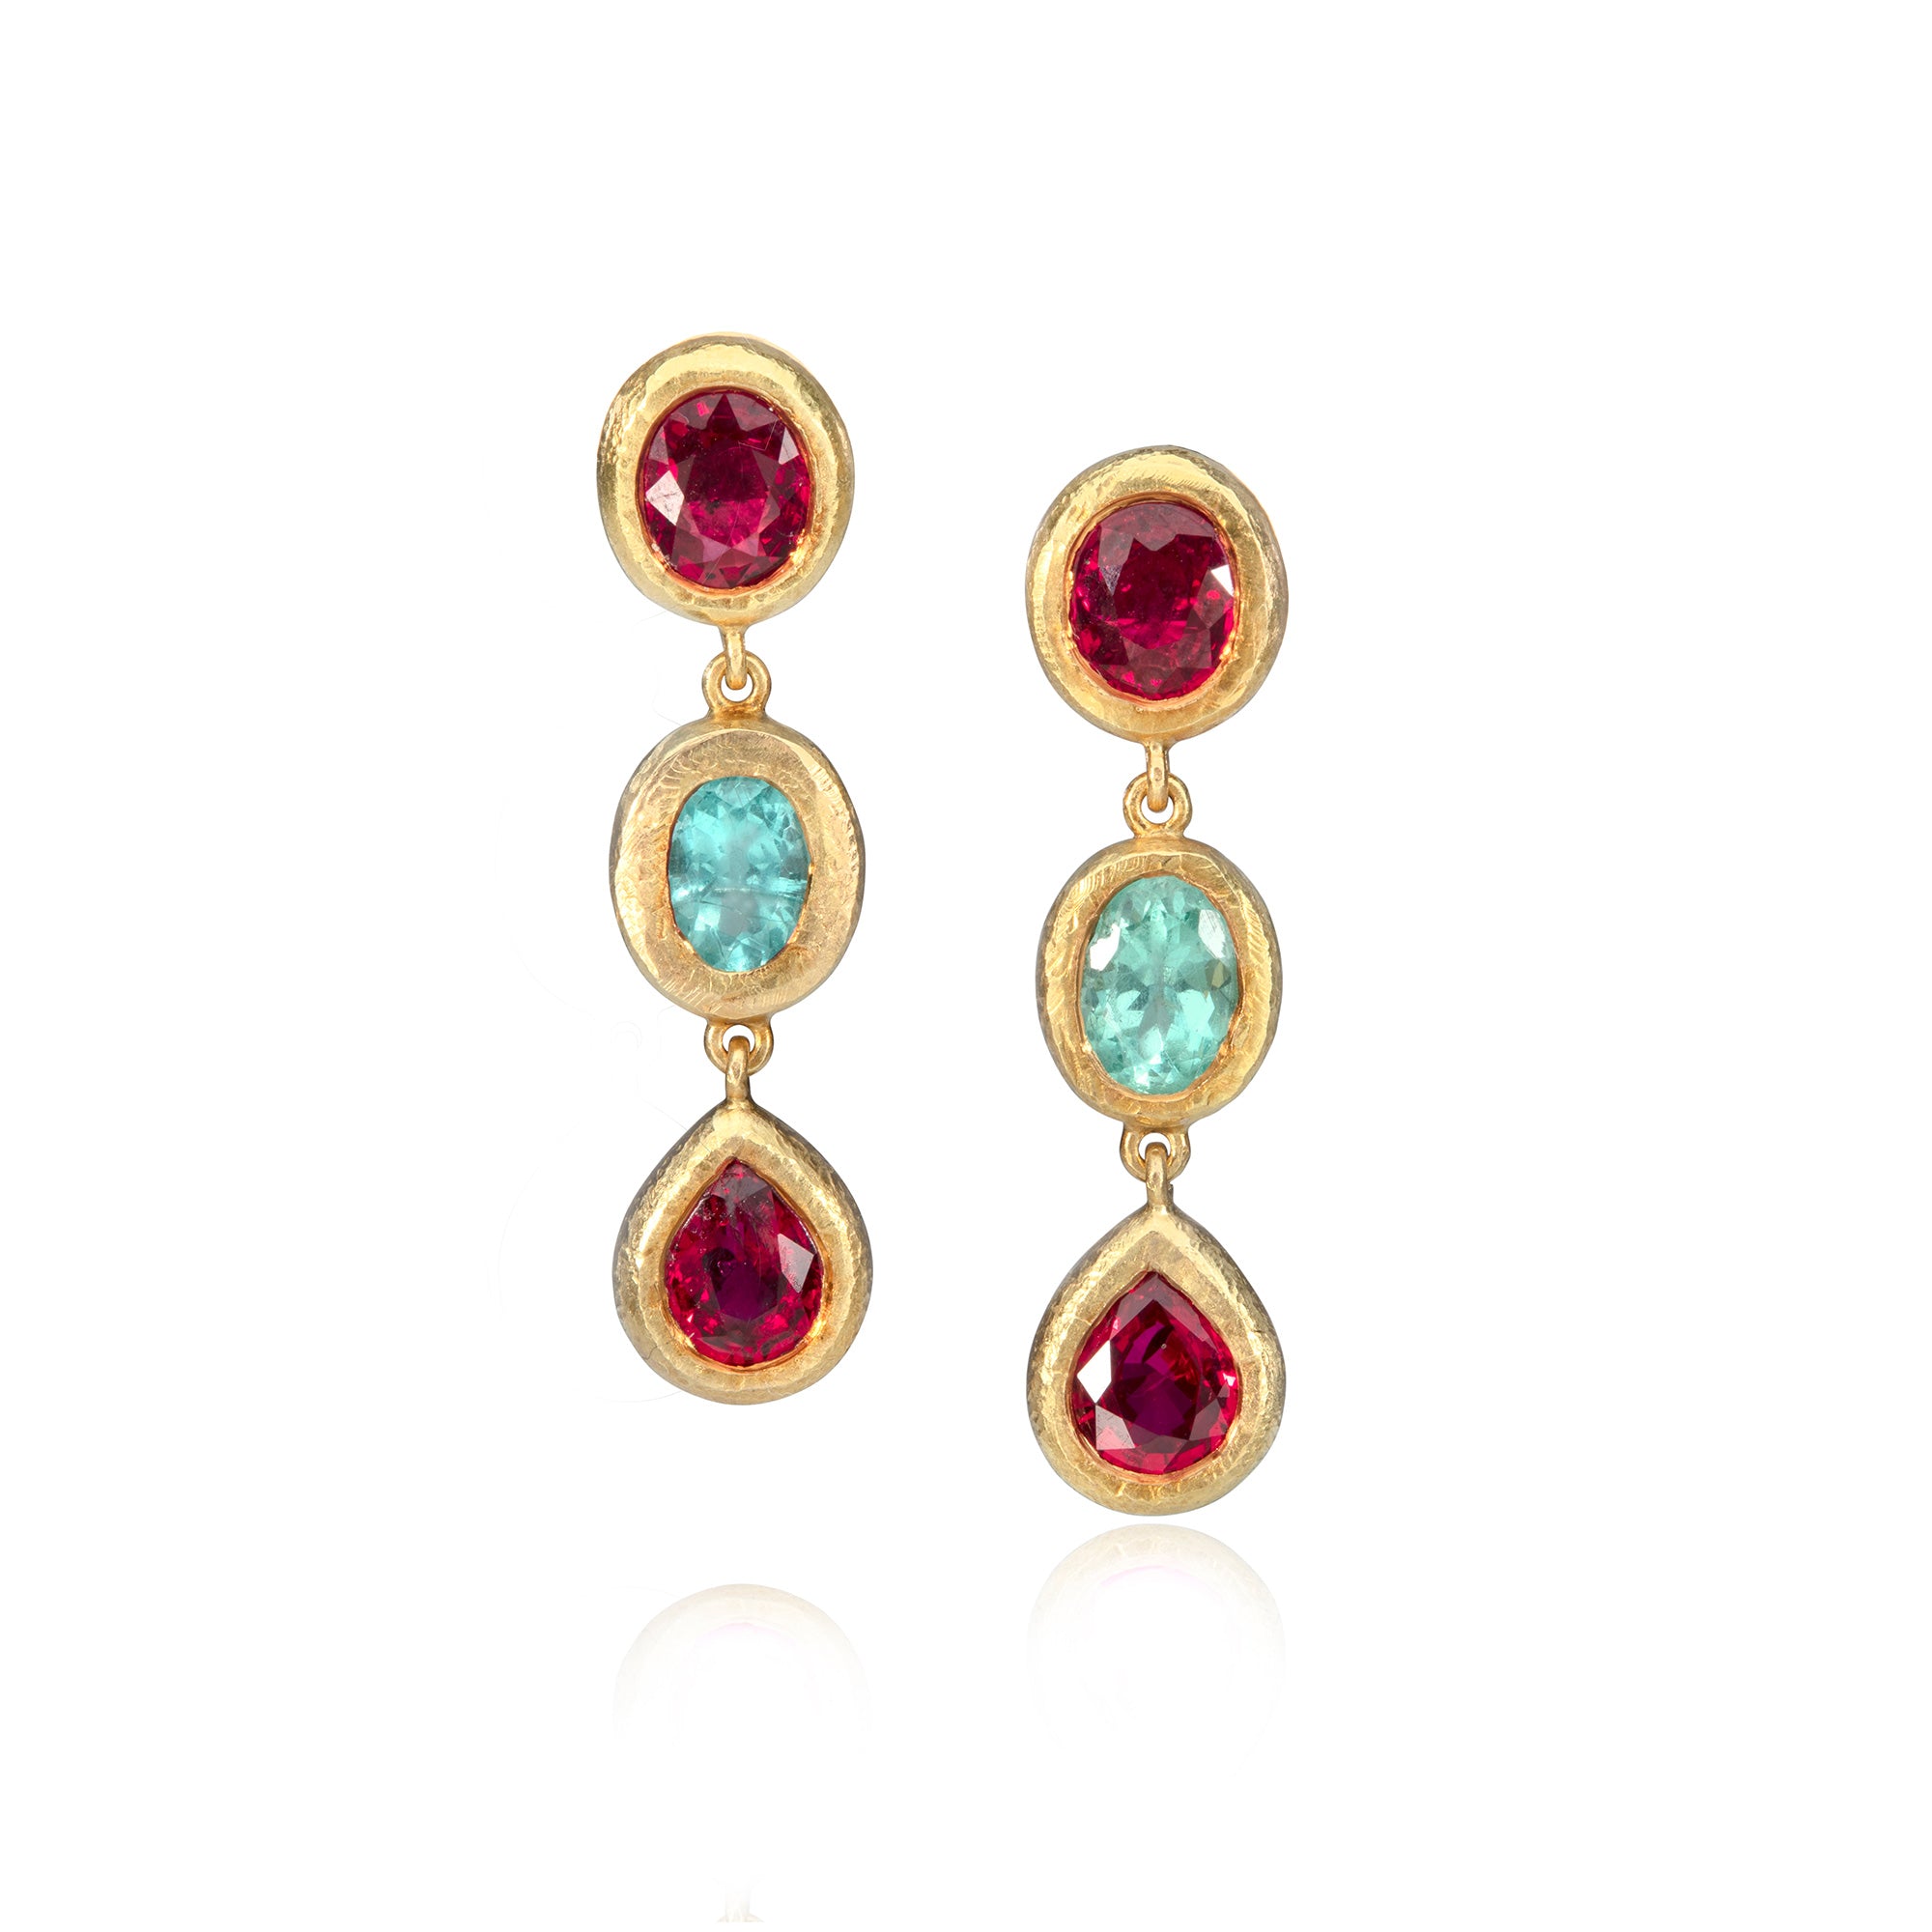 Paraiba tourmaline and ruby drop earrings on white background